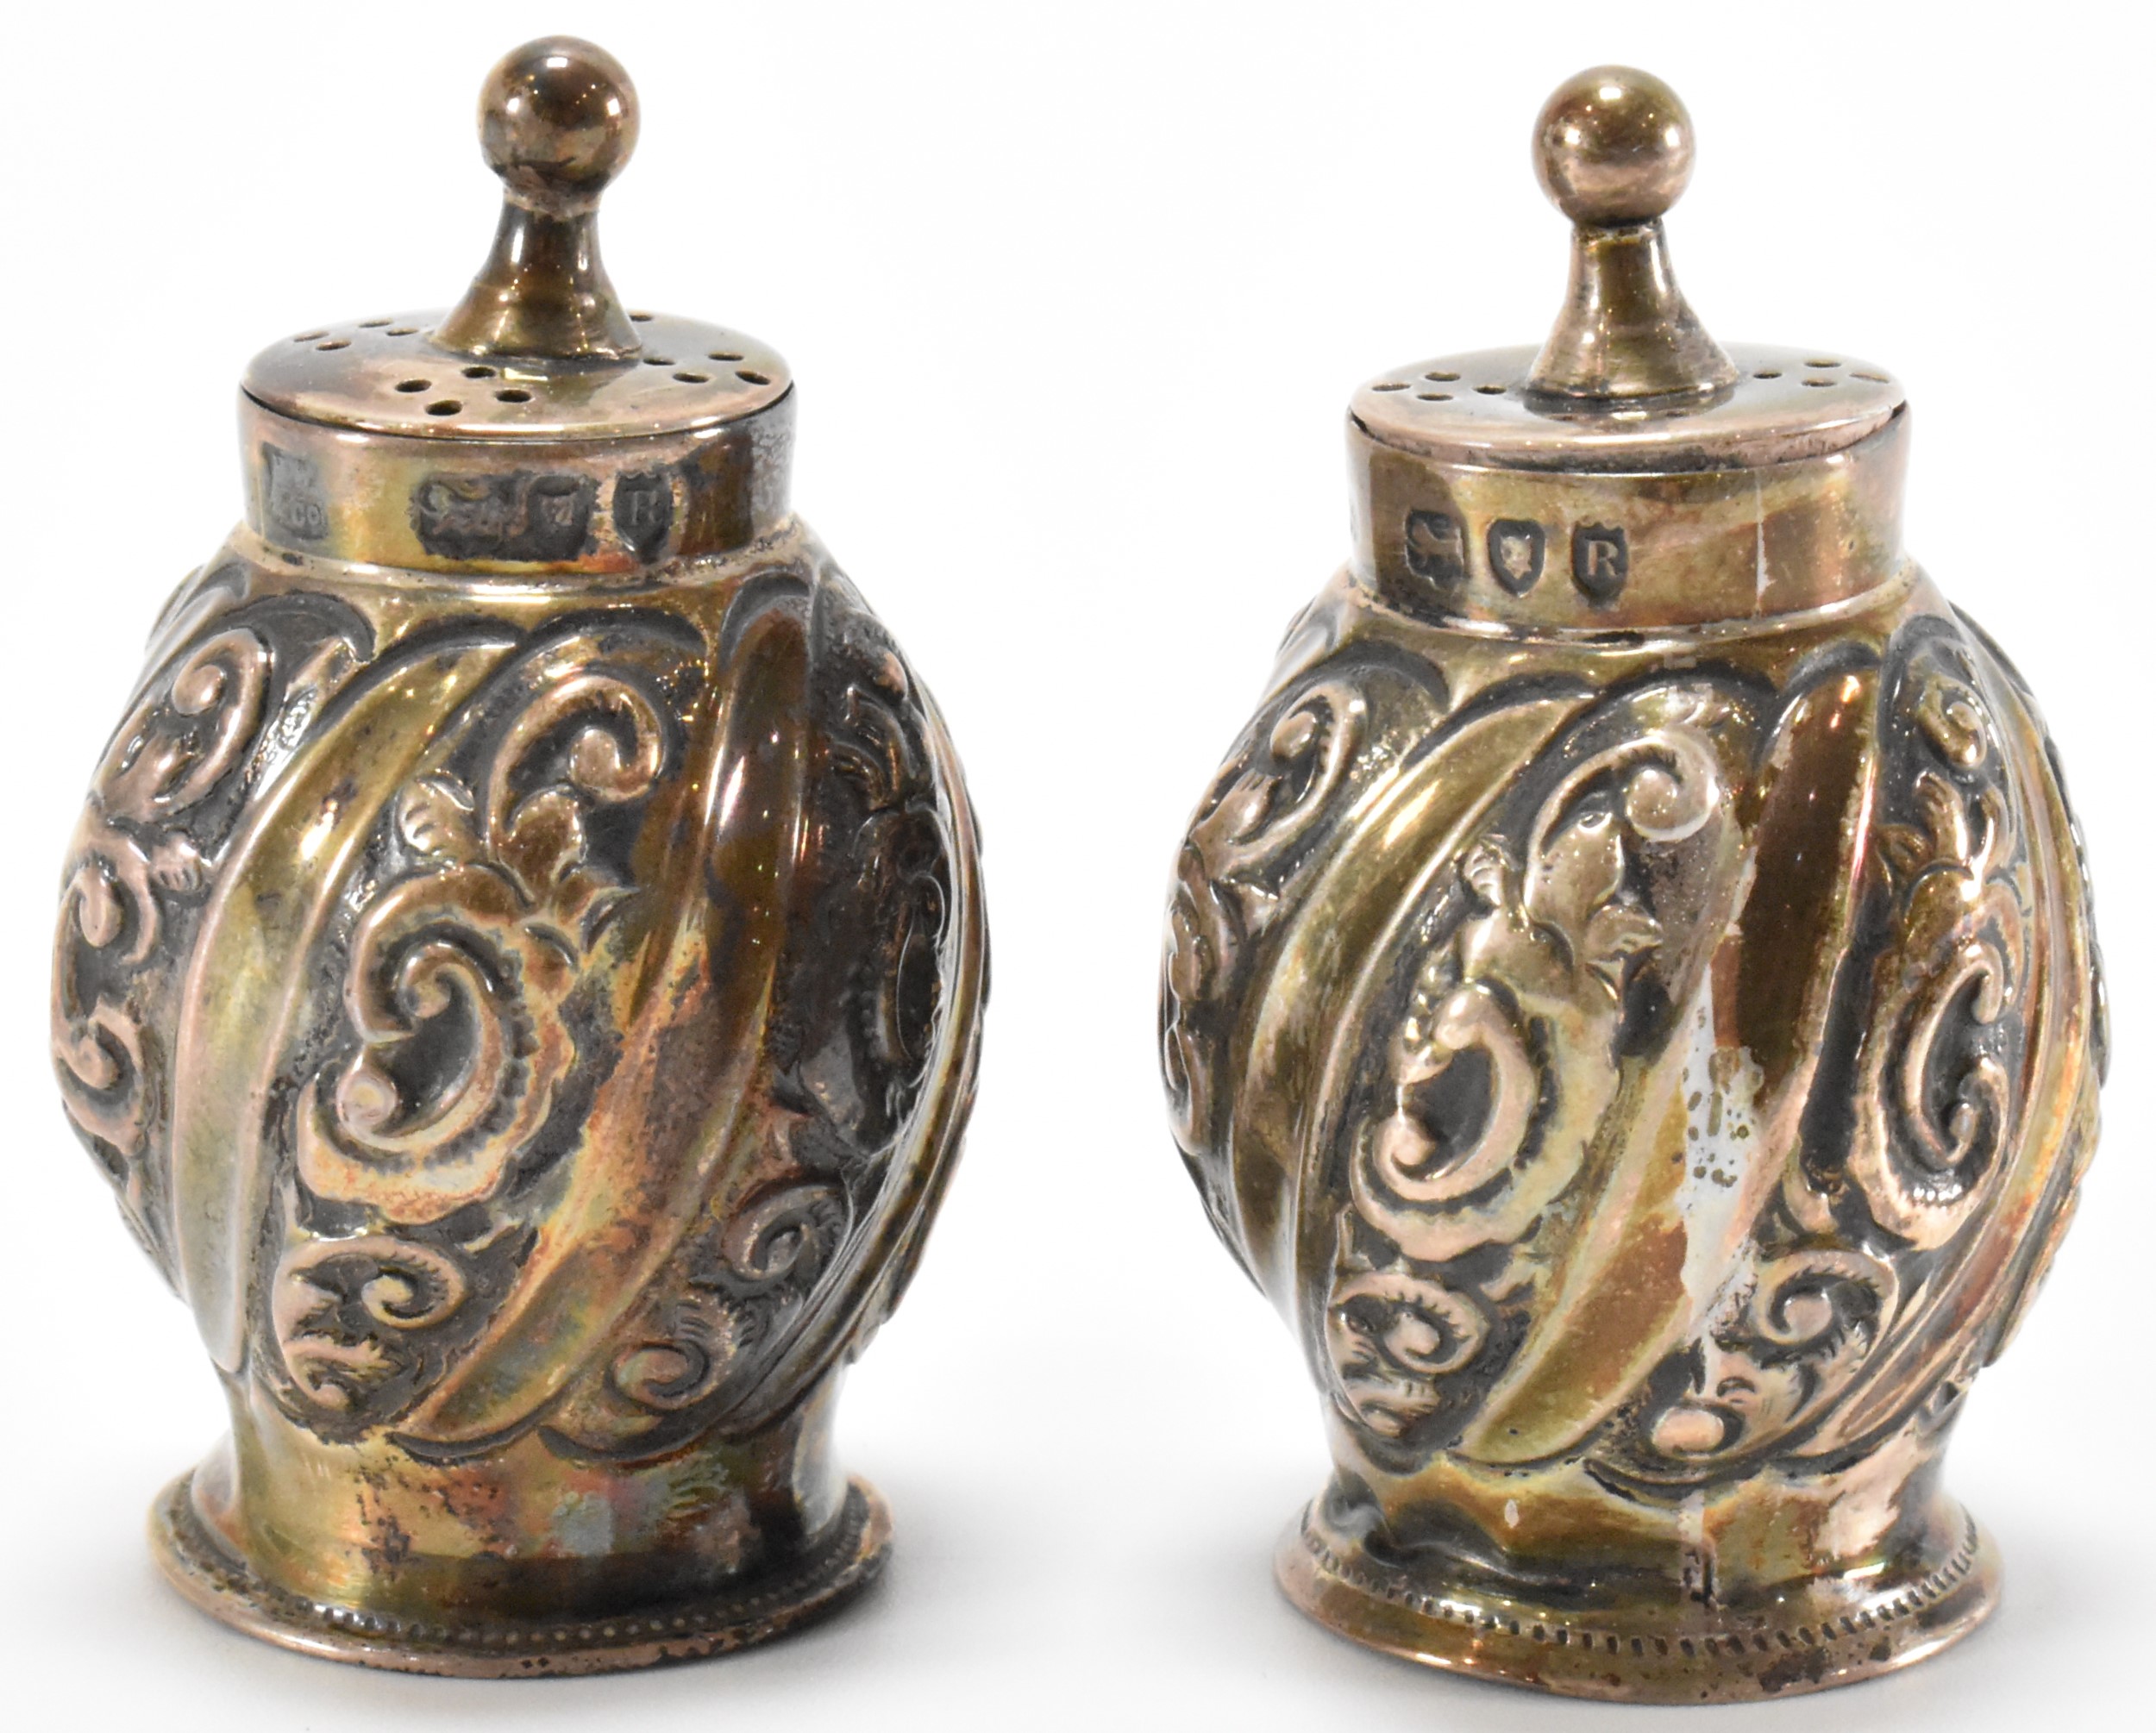 PAIR OF VICTORIAN SILVER PEPPER POTS